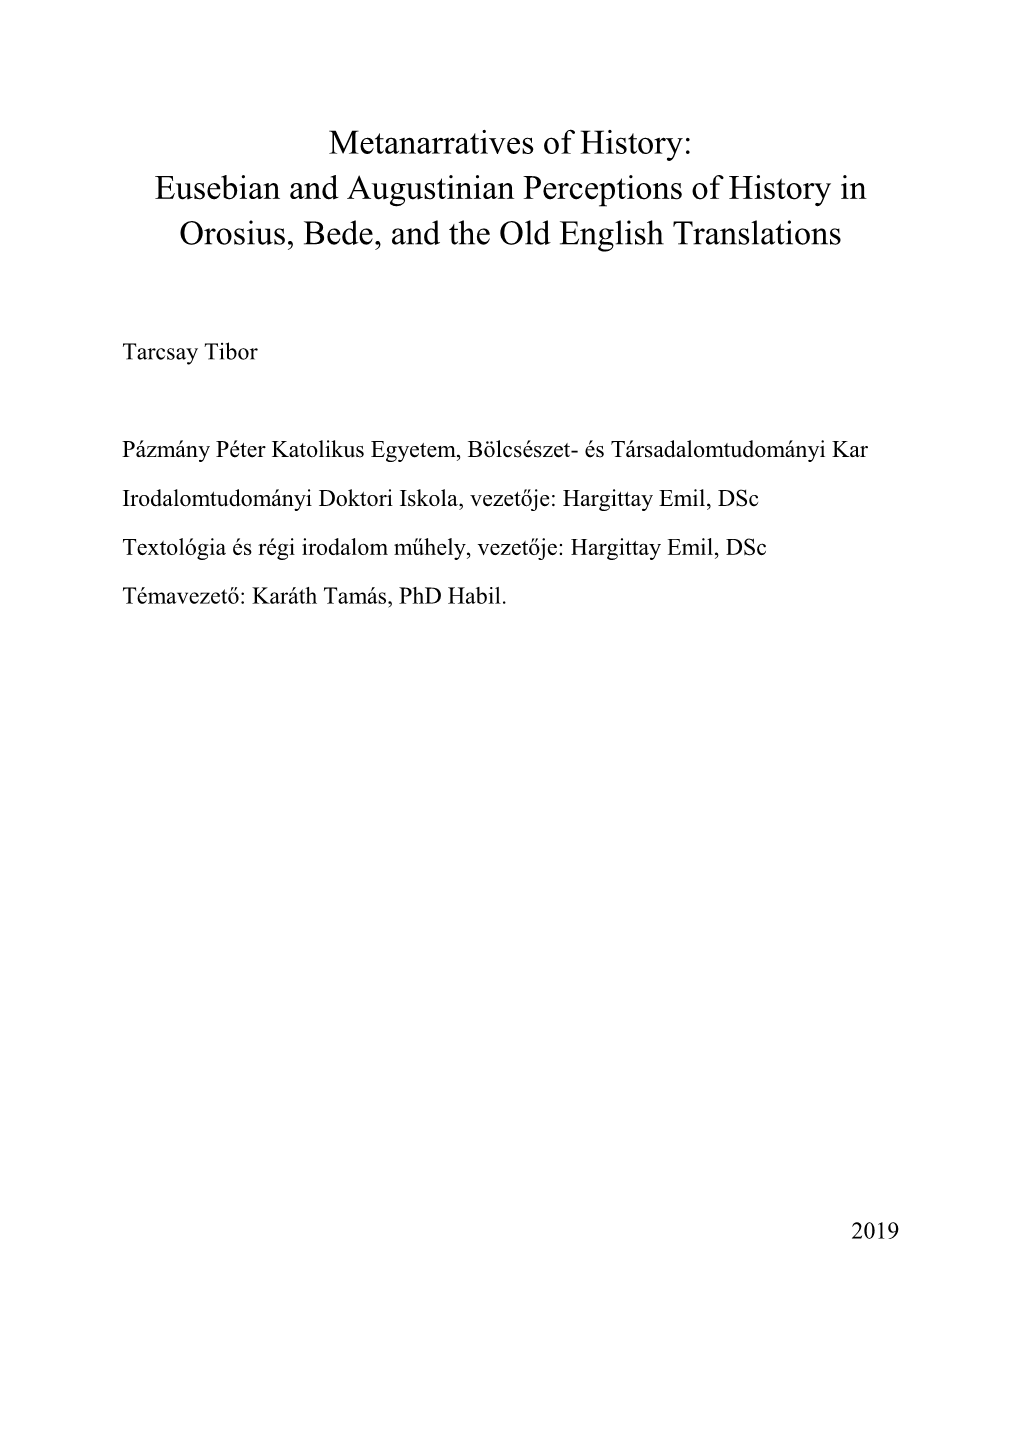 Eusebian and Augustinian Perceptions of History in Orosius, Bede, and the Old English Translations